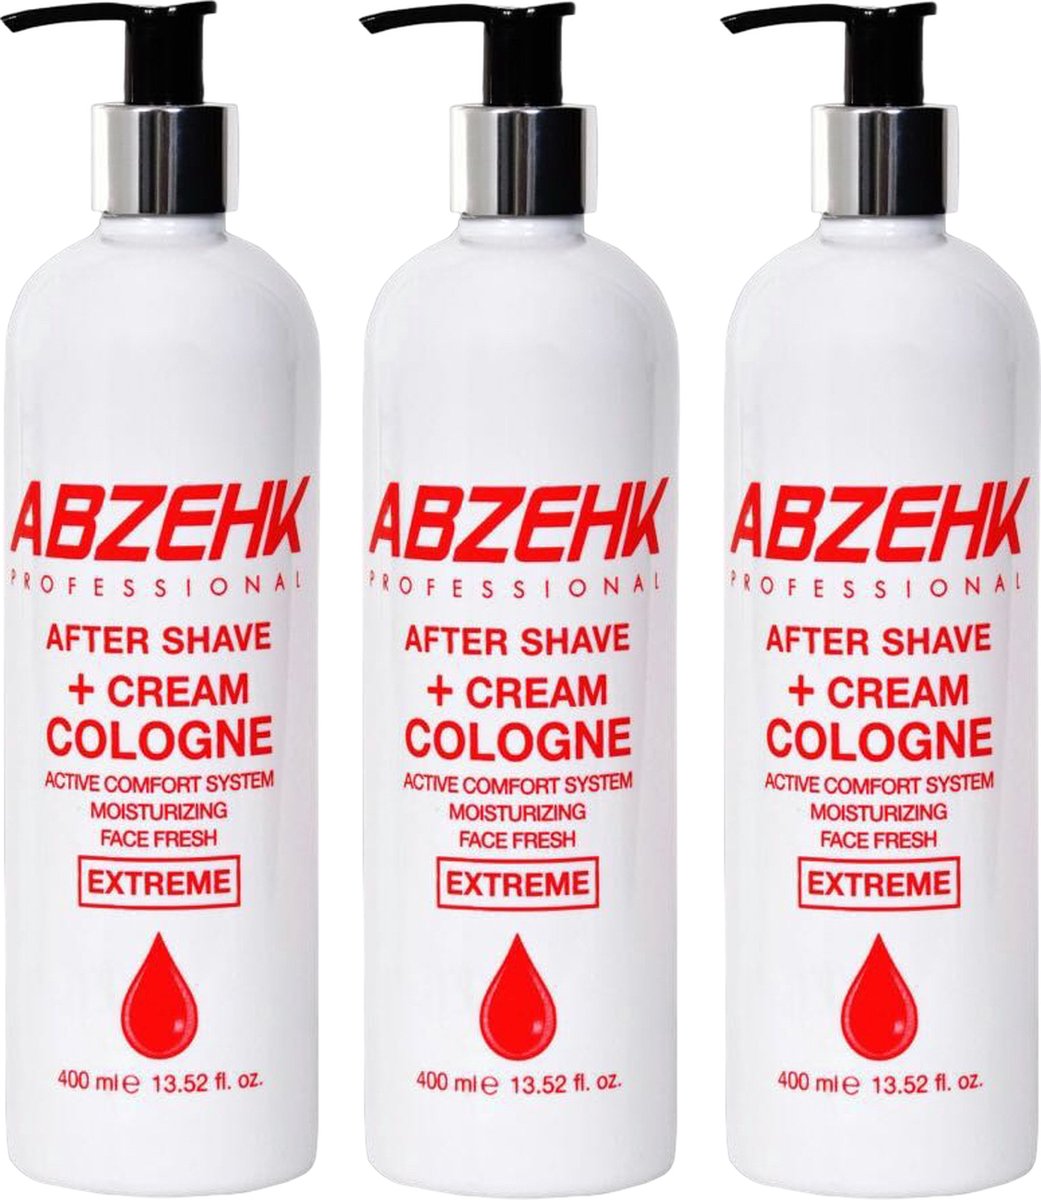 Abzehk After Shave + Cream Cologne Extreme 400ml - 3 stuks